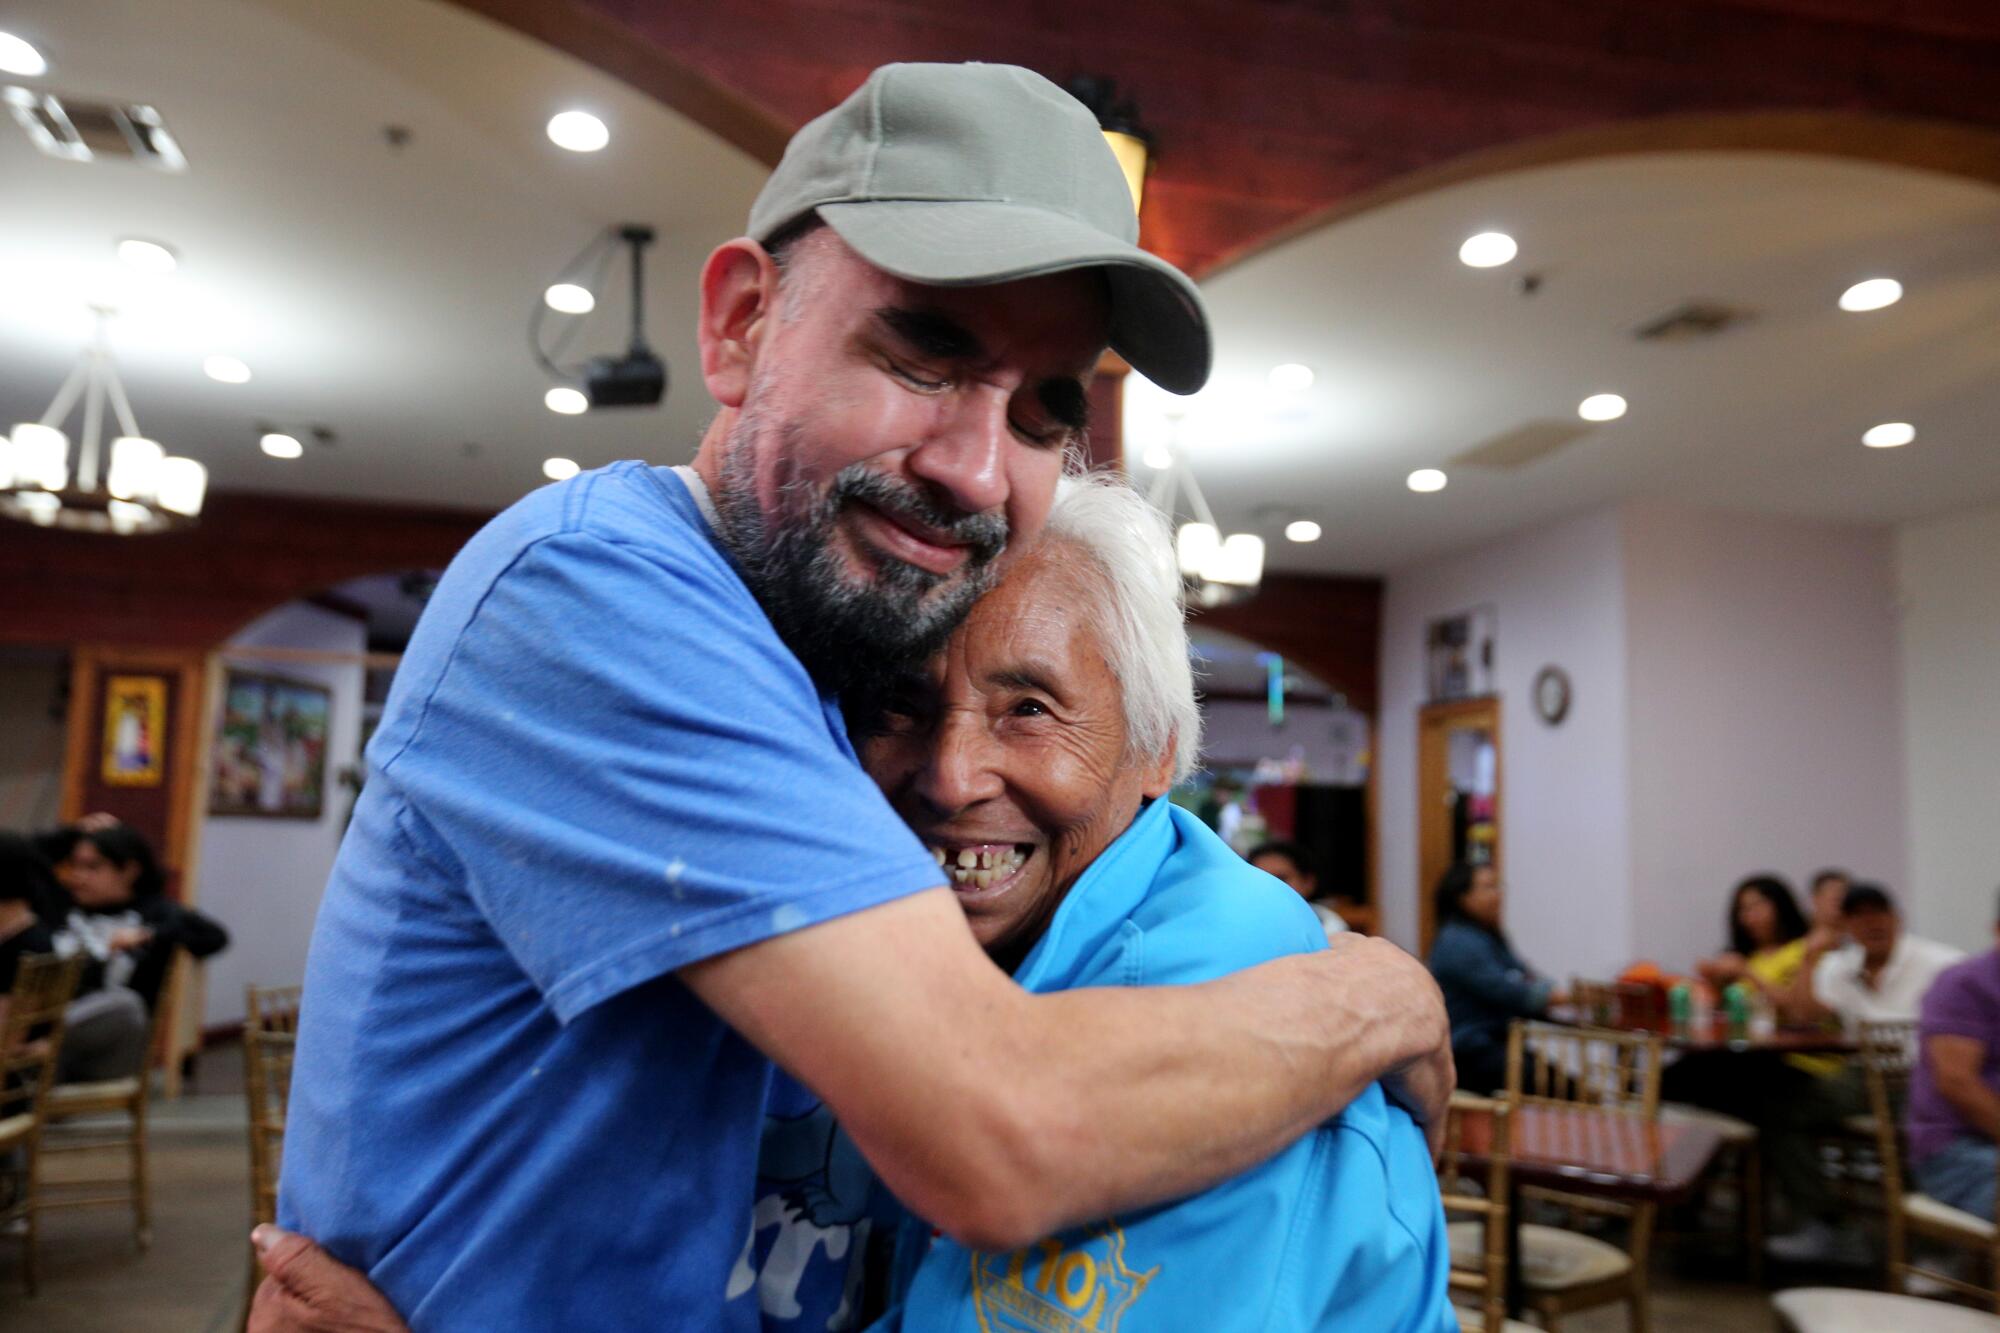 After 34 years of not seeing her, Alberto Martinez, 53, of L.A., hugs his mother Irene Hernandez Mejia, 81 of Morelos, Mexico